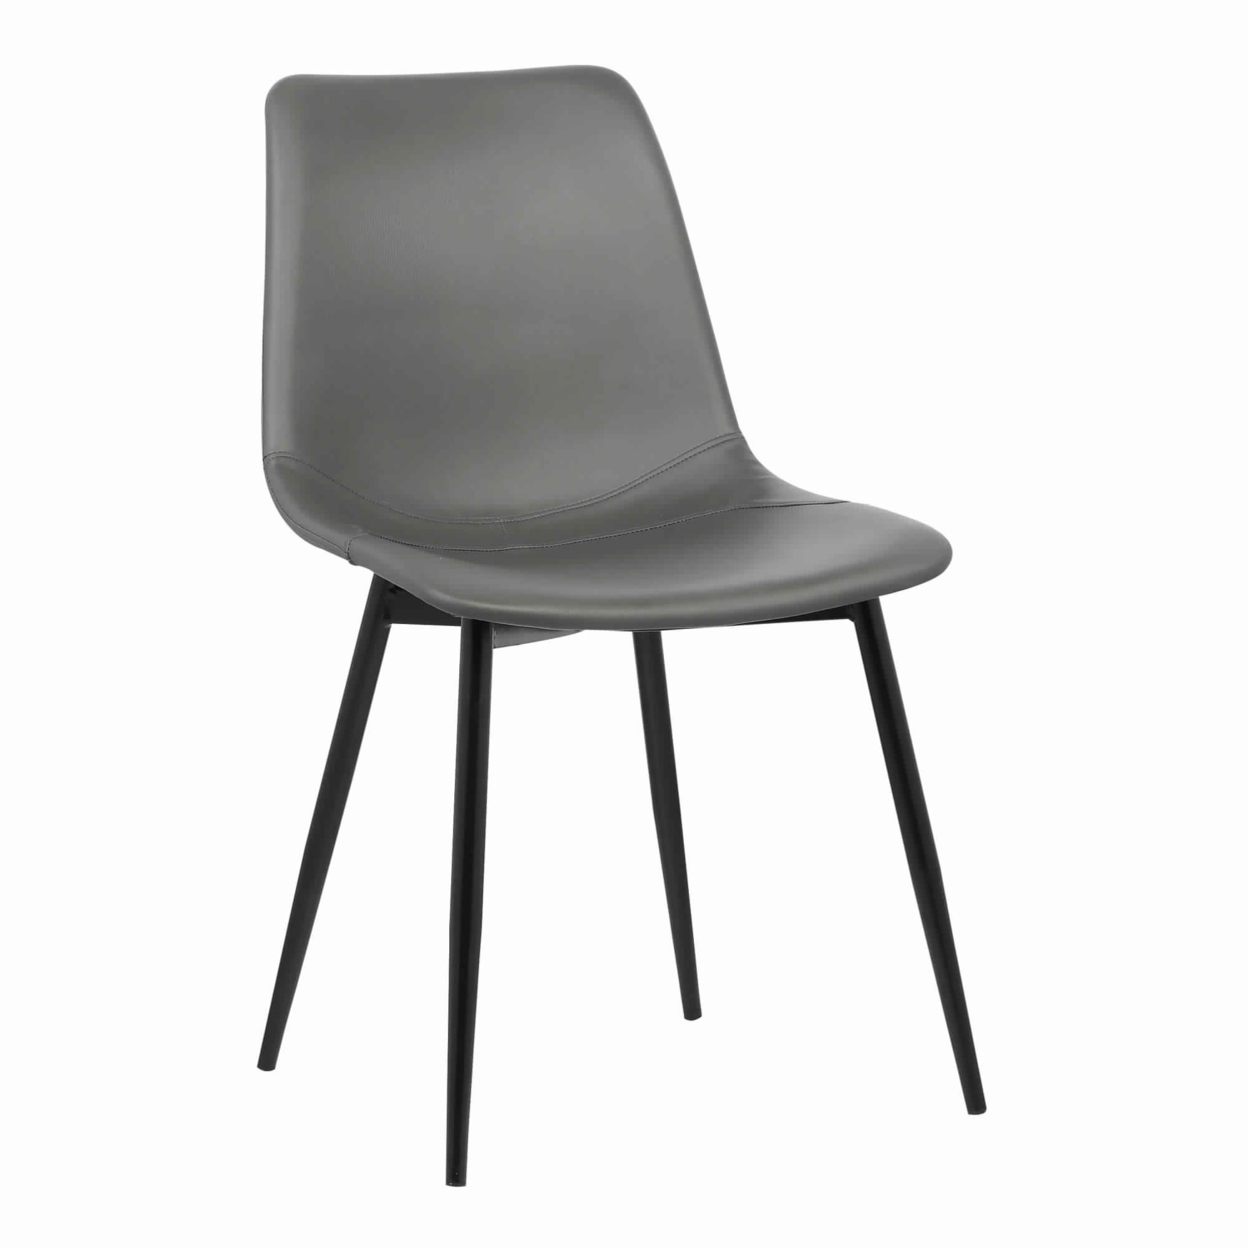 Leatherette Dining Chair With Bucket Seat And Metal Legs, Gray And Black- Saltoro Sherpi